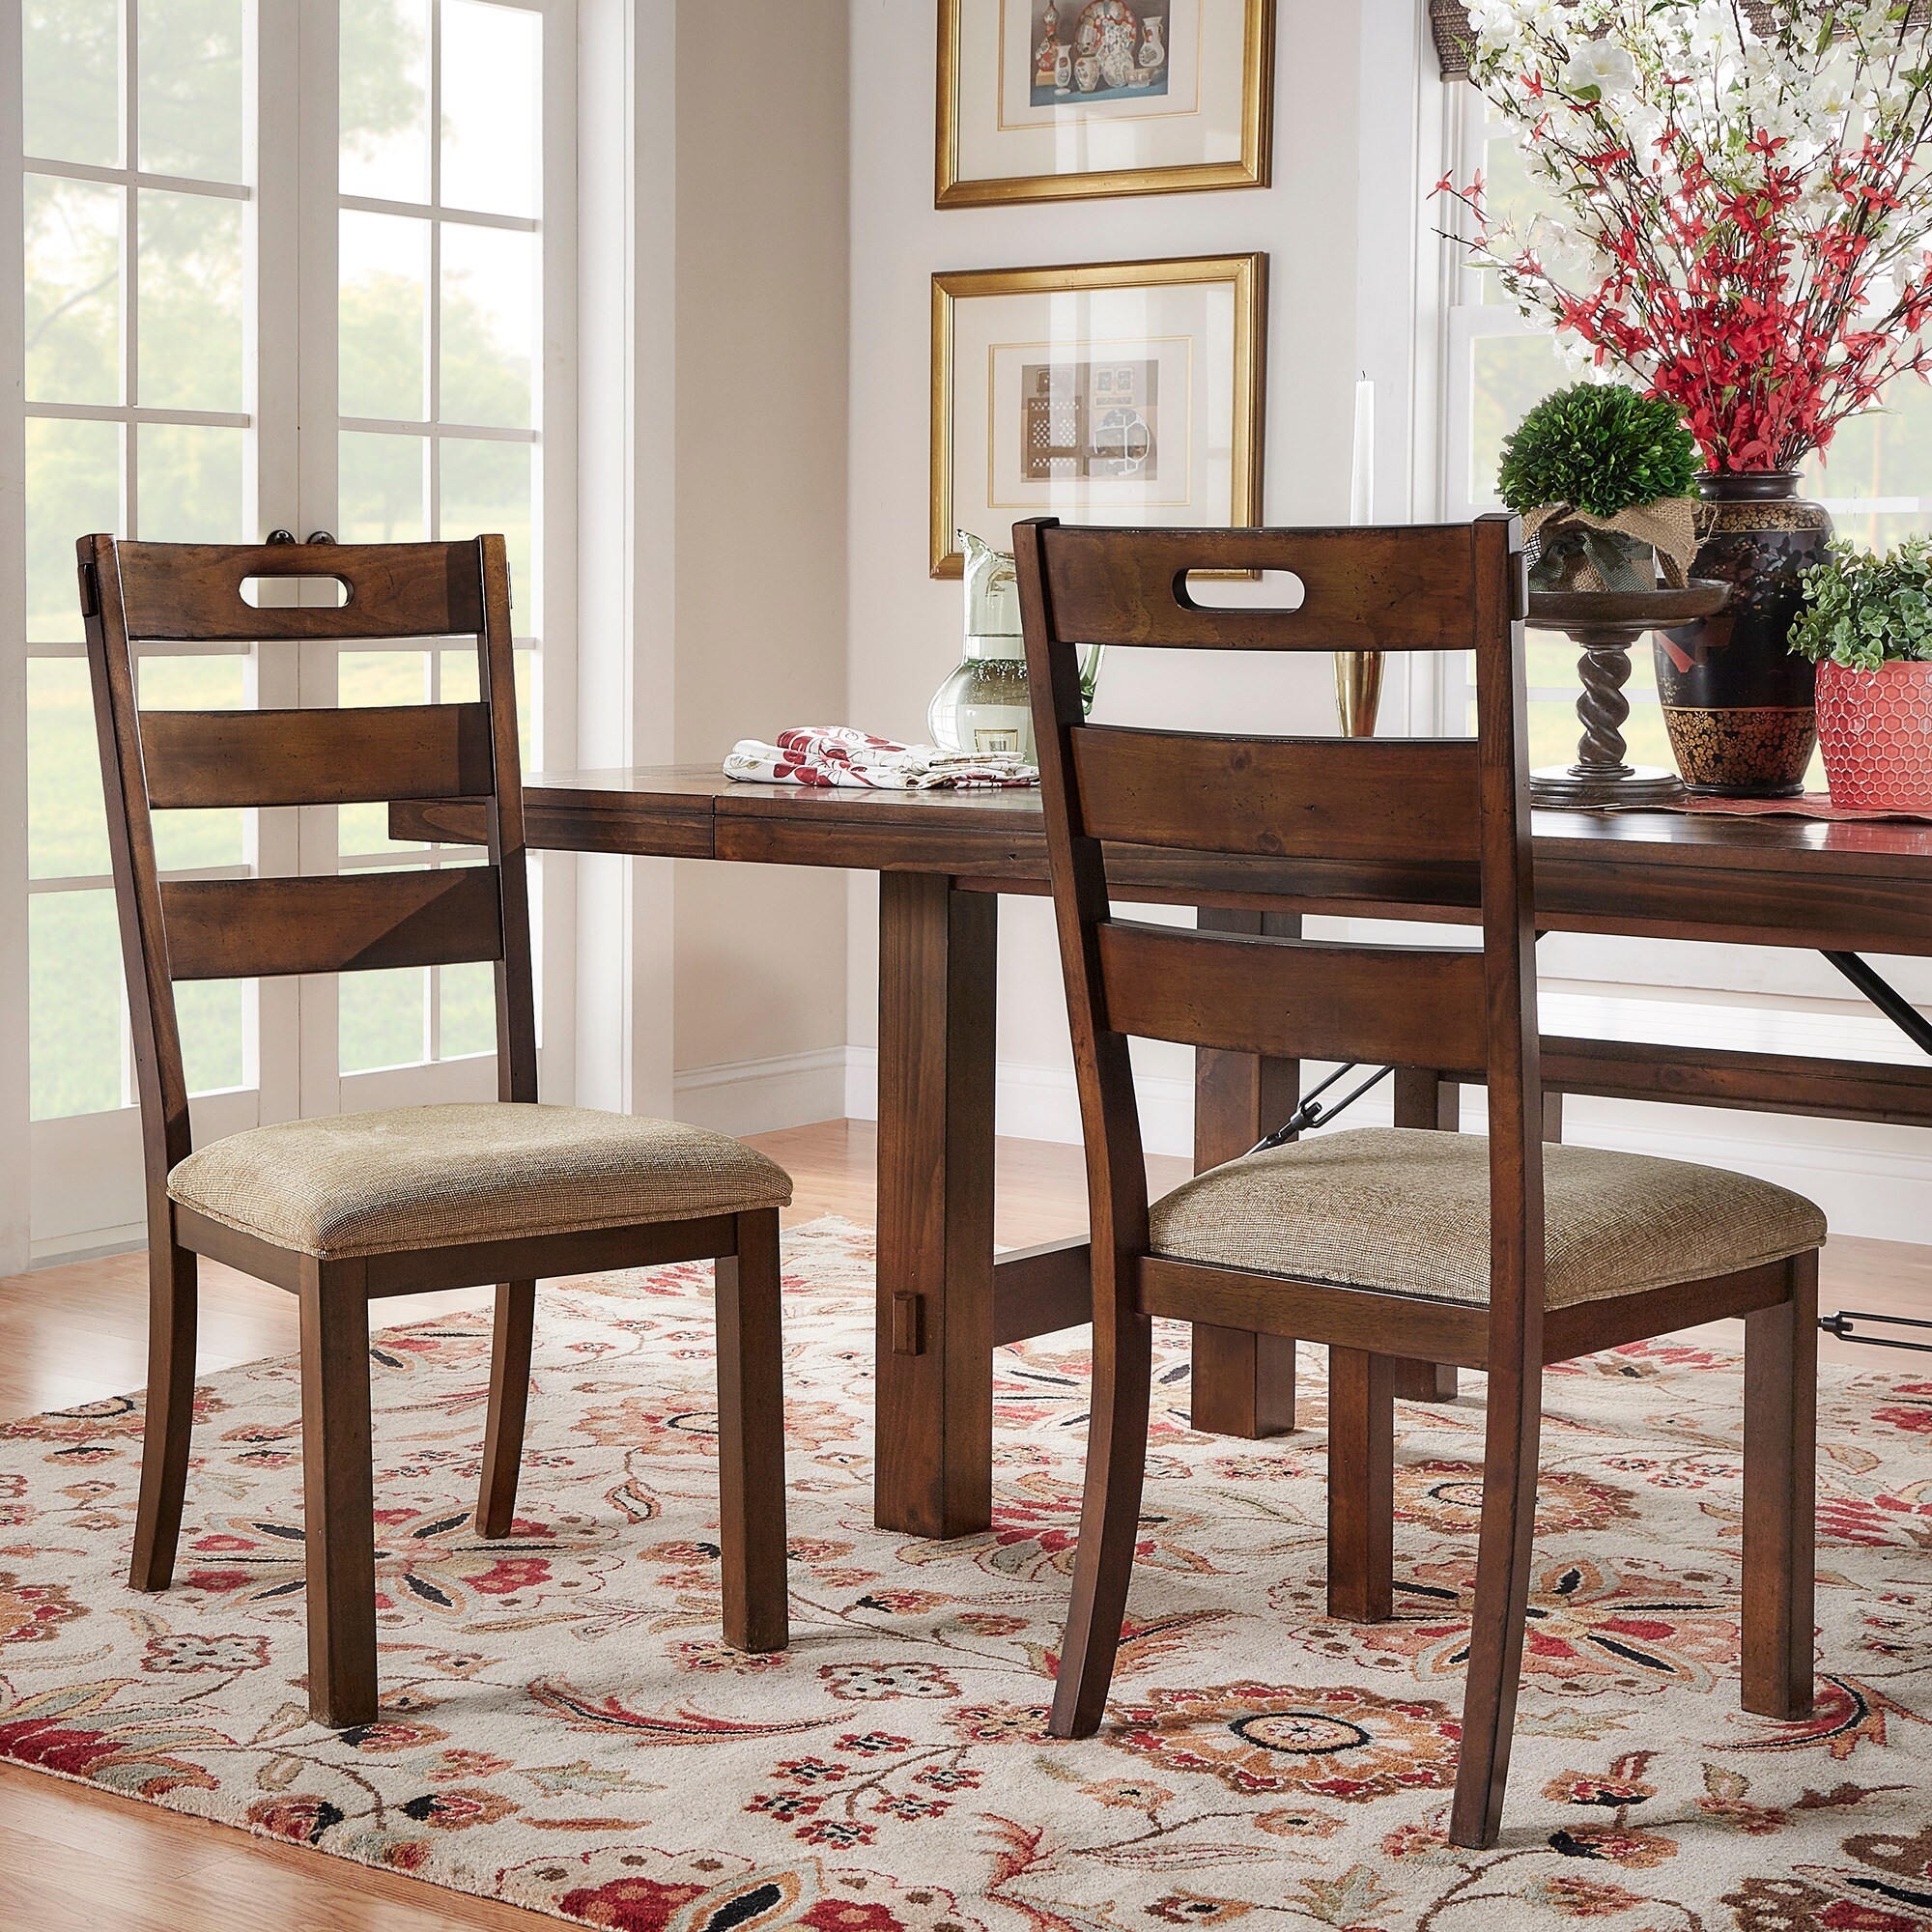 Wood Dining Room & Bar Furniture Buy Dining Chairs